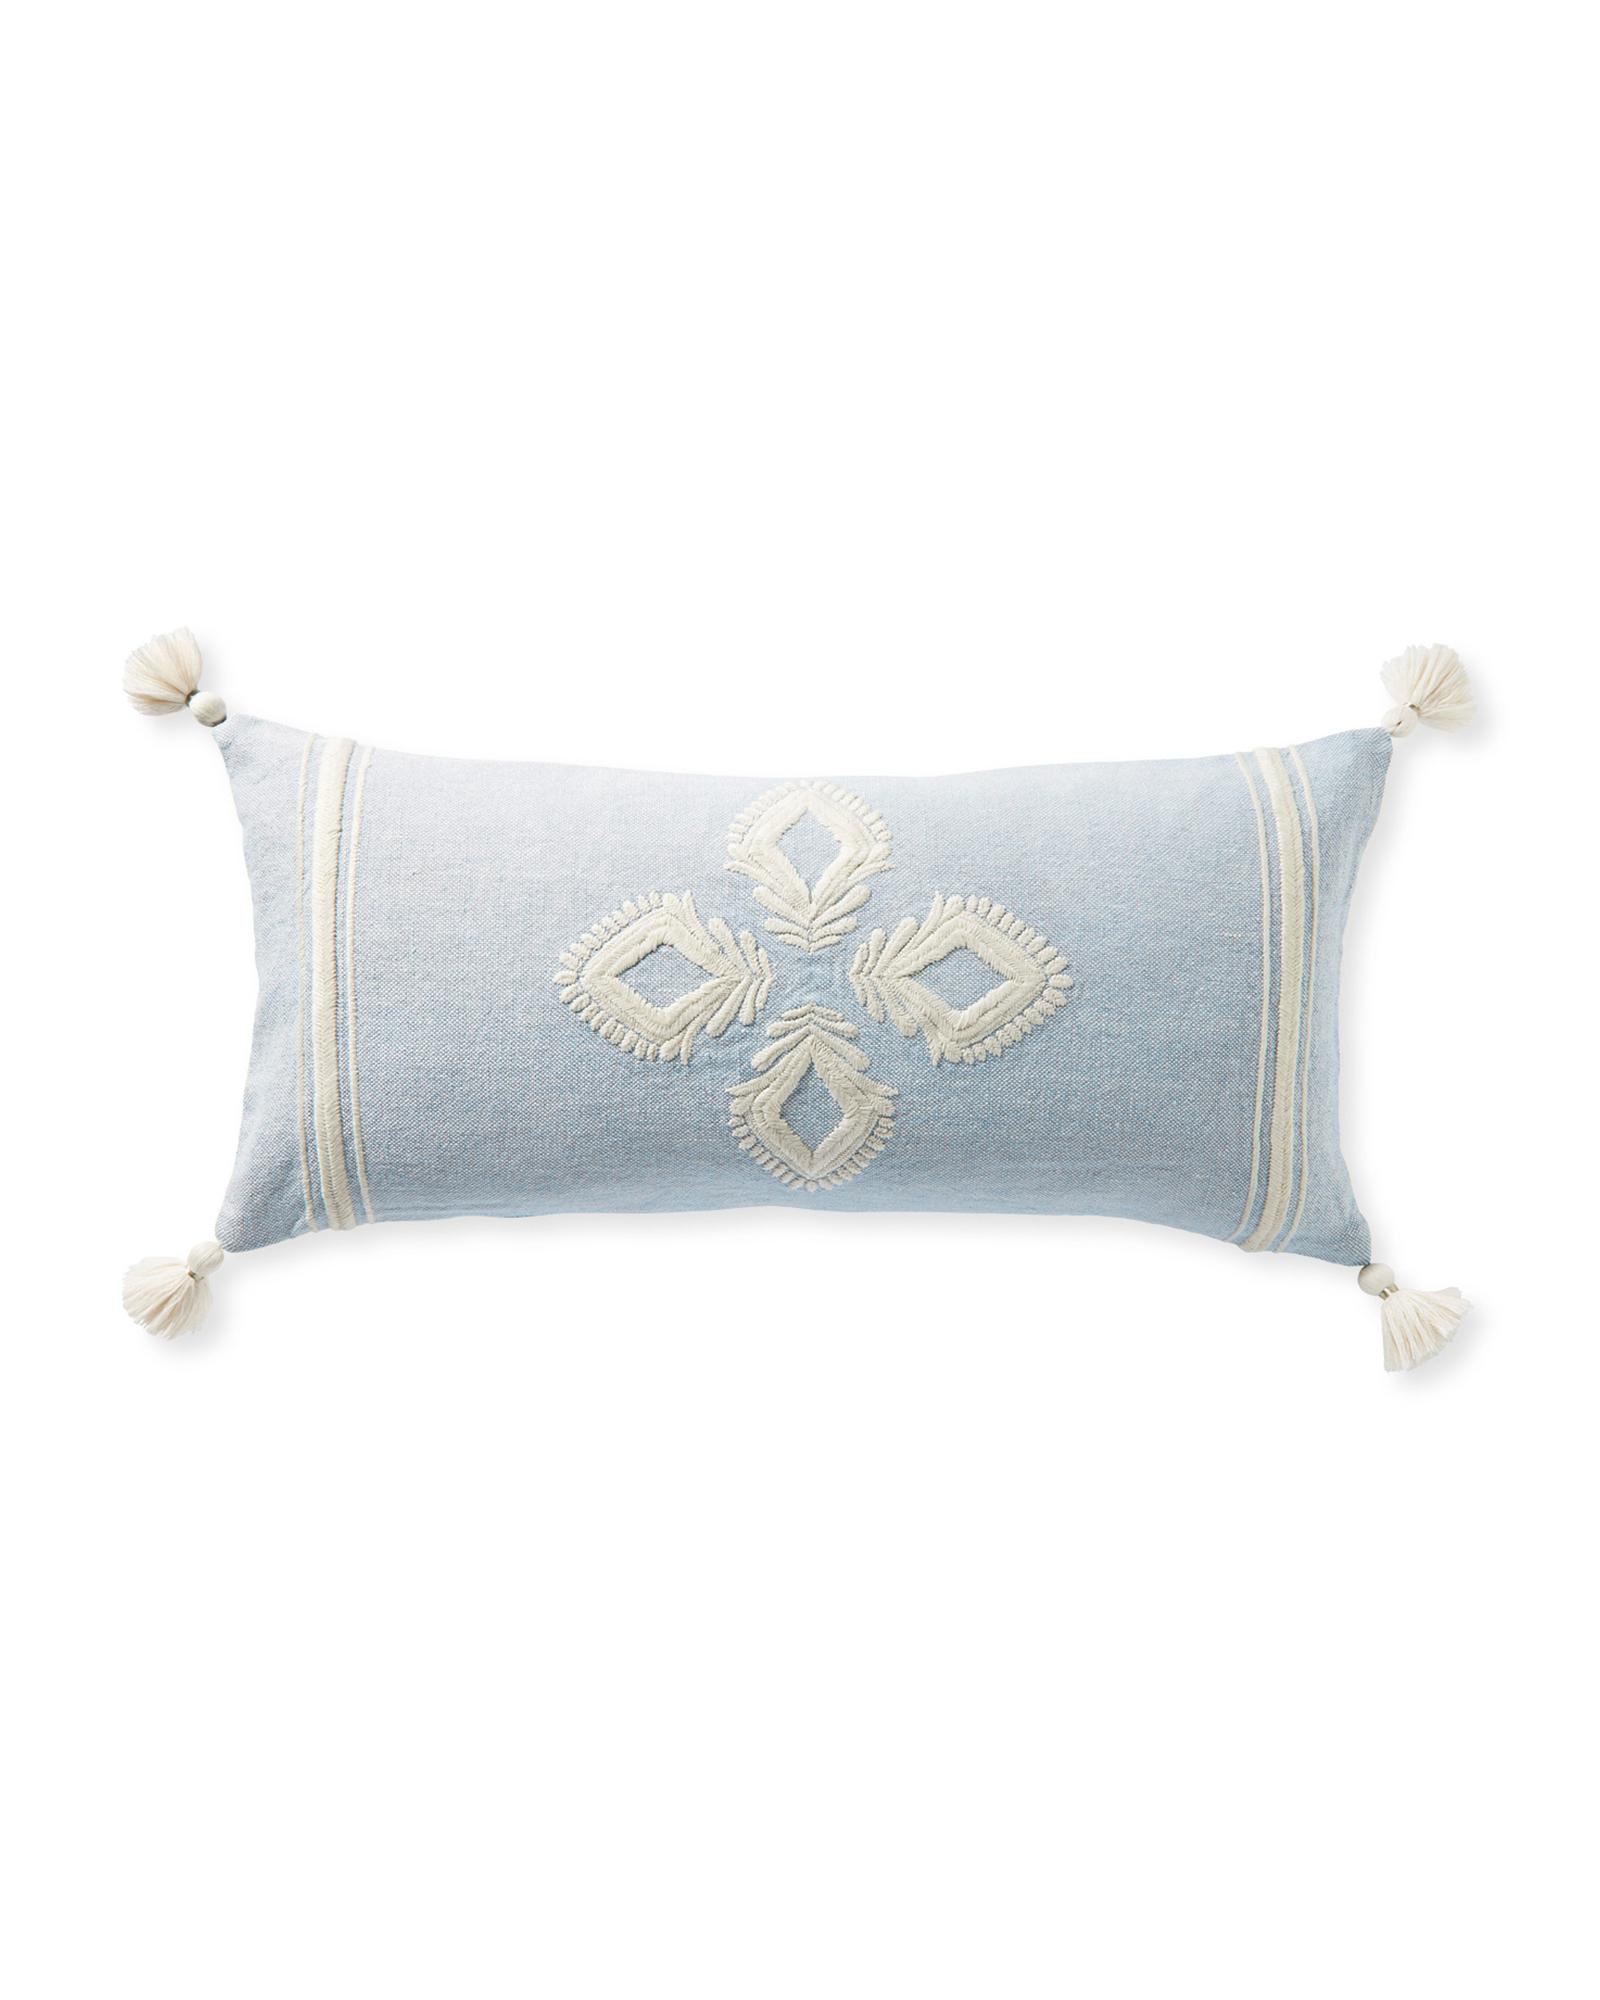 Fairhope Pillow Cover in Coastal Blue, 22 Sq | Serena & Lily